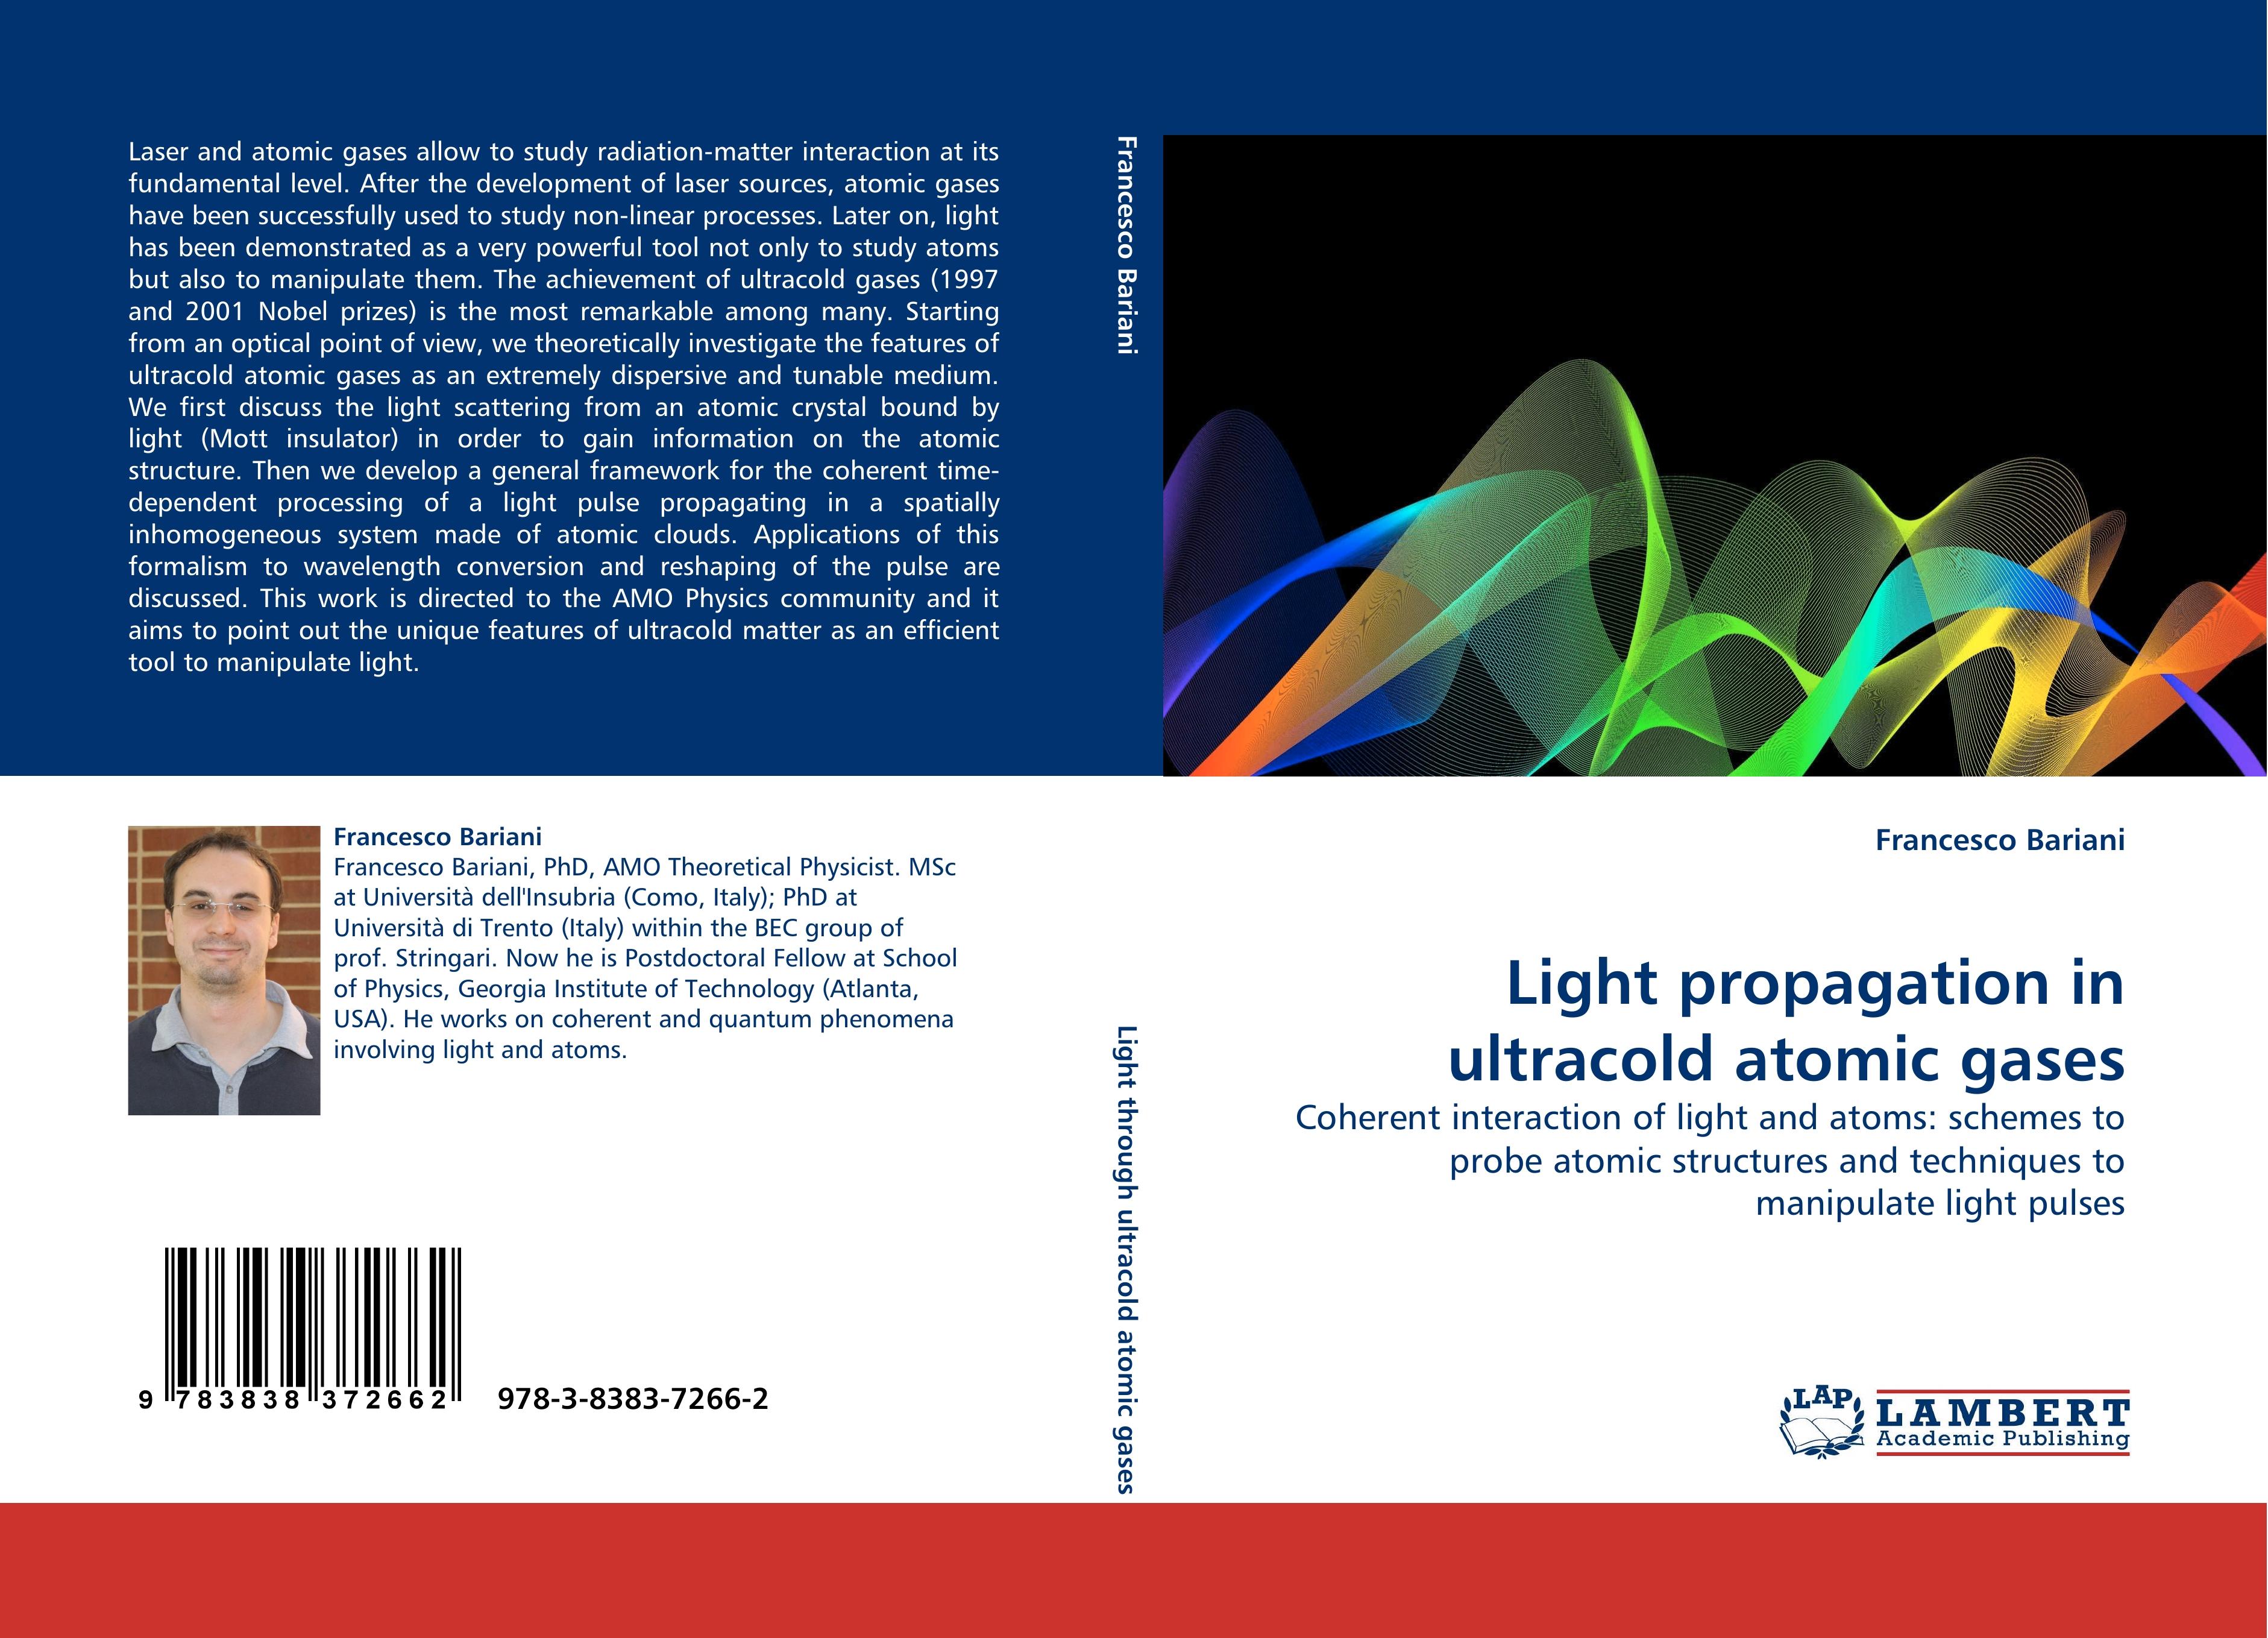 Light propagation in ultracold atomic gases / Coherent interaction of light and atoms: schemes to probe atomic structures and techniques to manipulate light pulses / Francesco Bariani / Taschenbuch - Bariani, Francesco